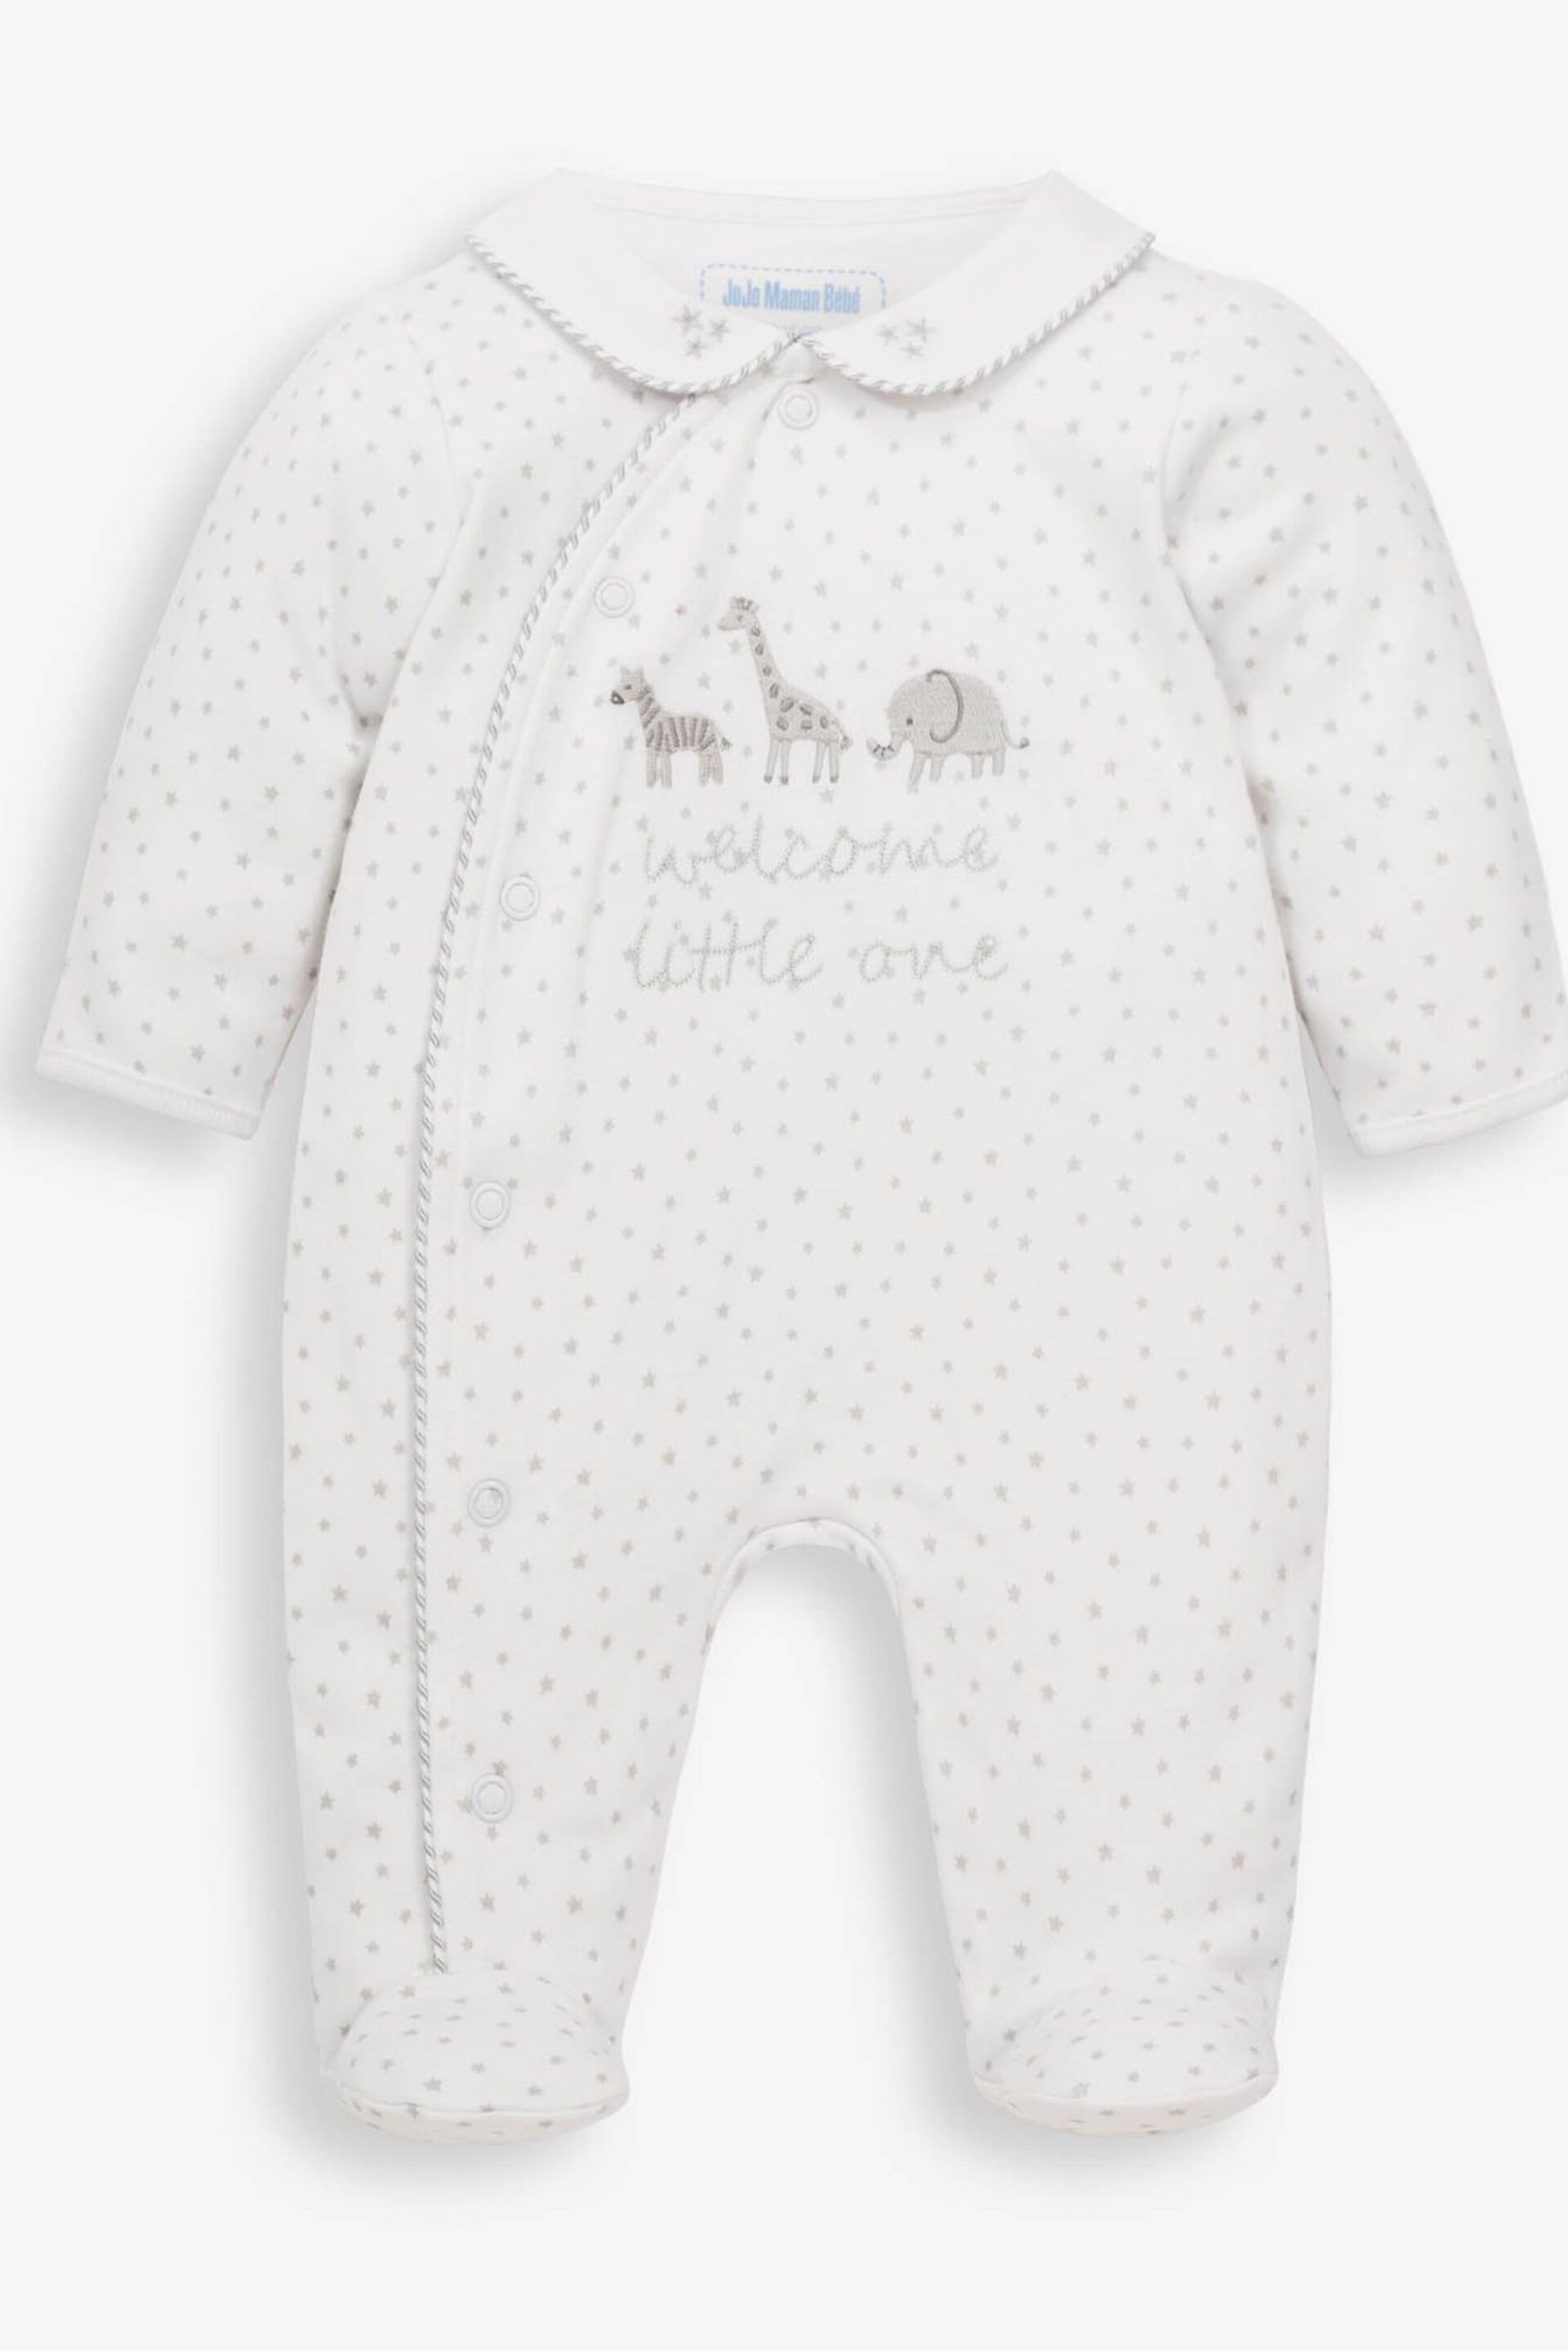 JoJo Maman Bébé White Welcome Little One Cotton Baby Sleepsuit - Image 3 of 4